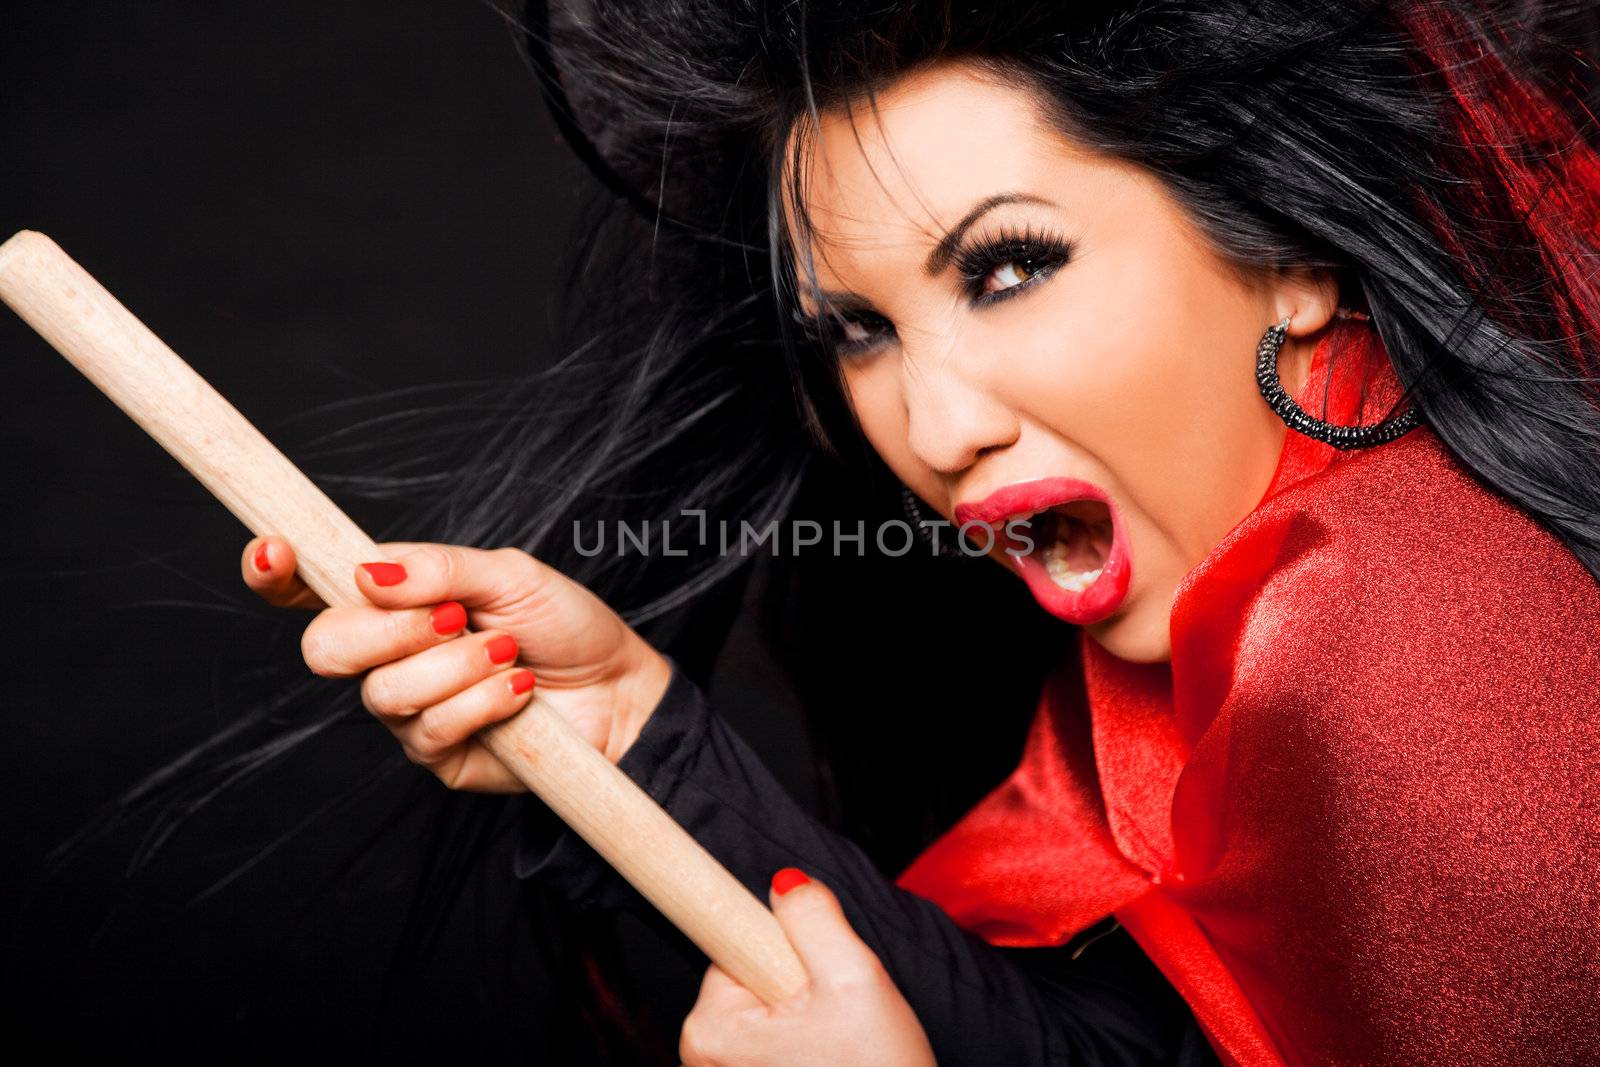 femalewitch with broomstick, looking scary and screaming